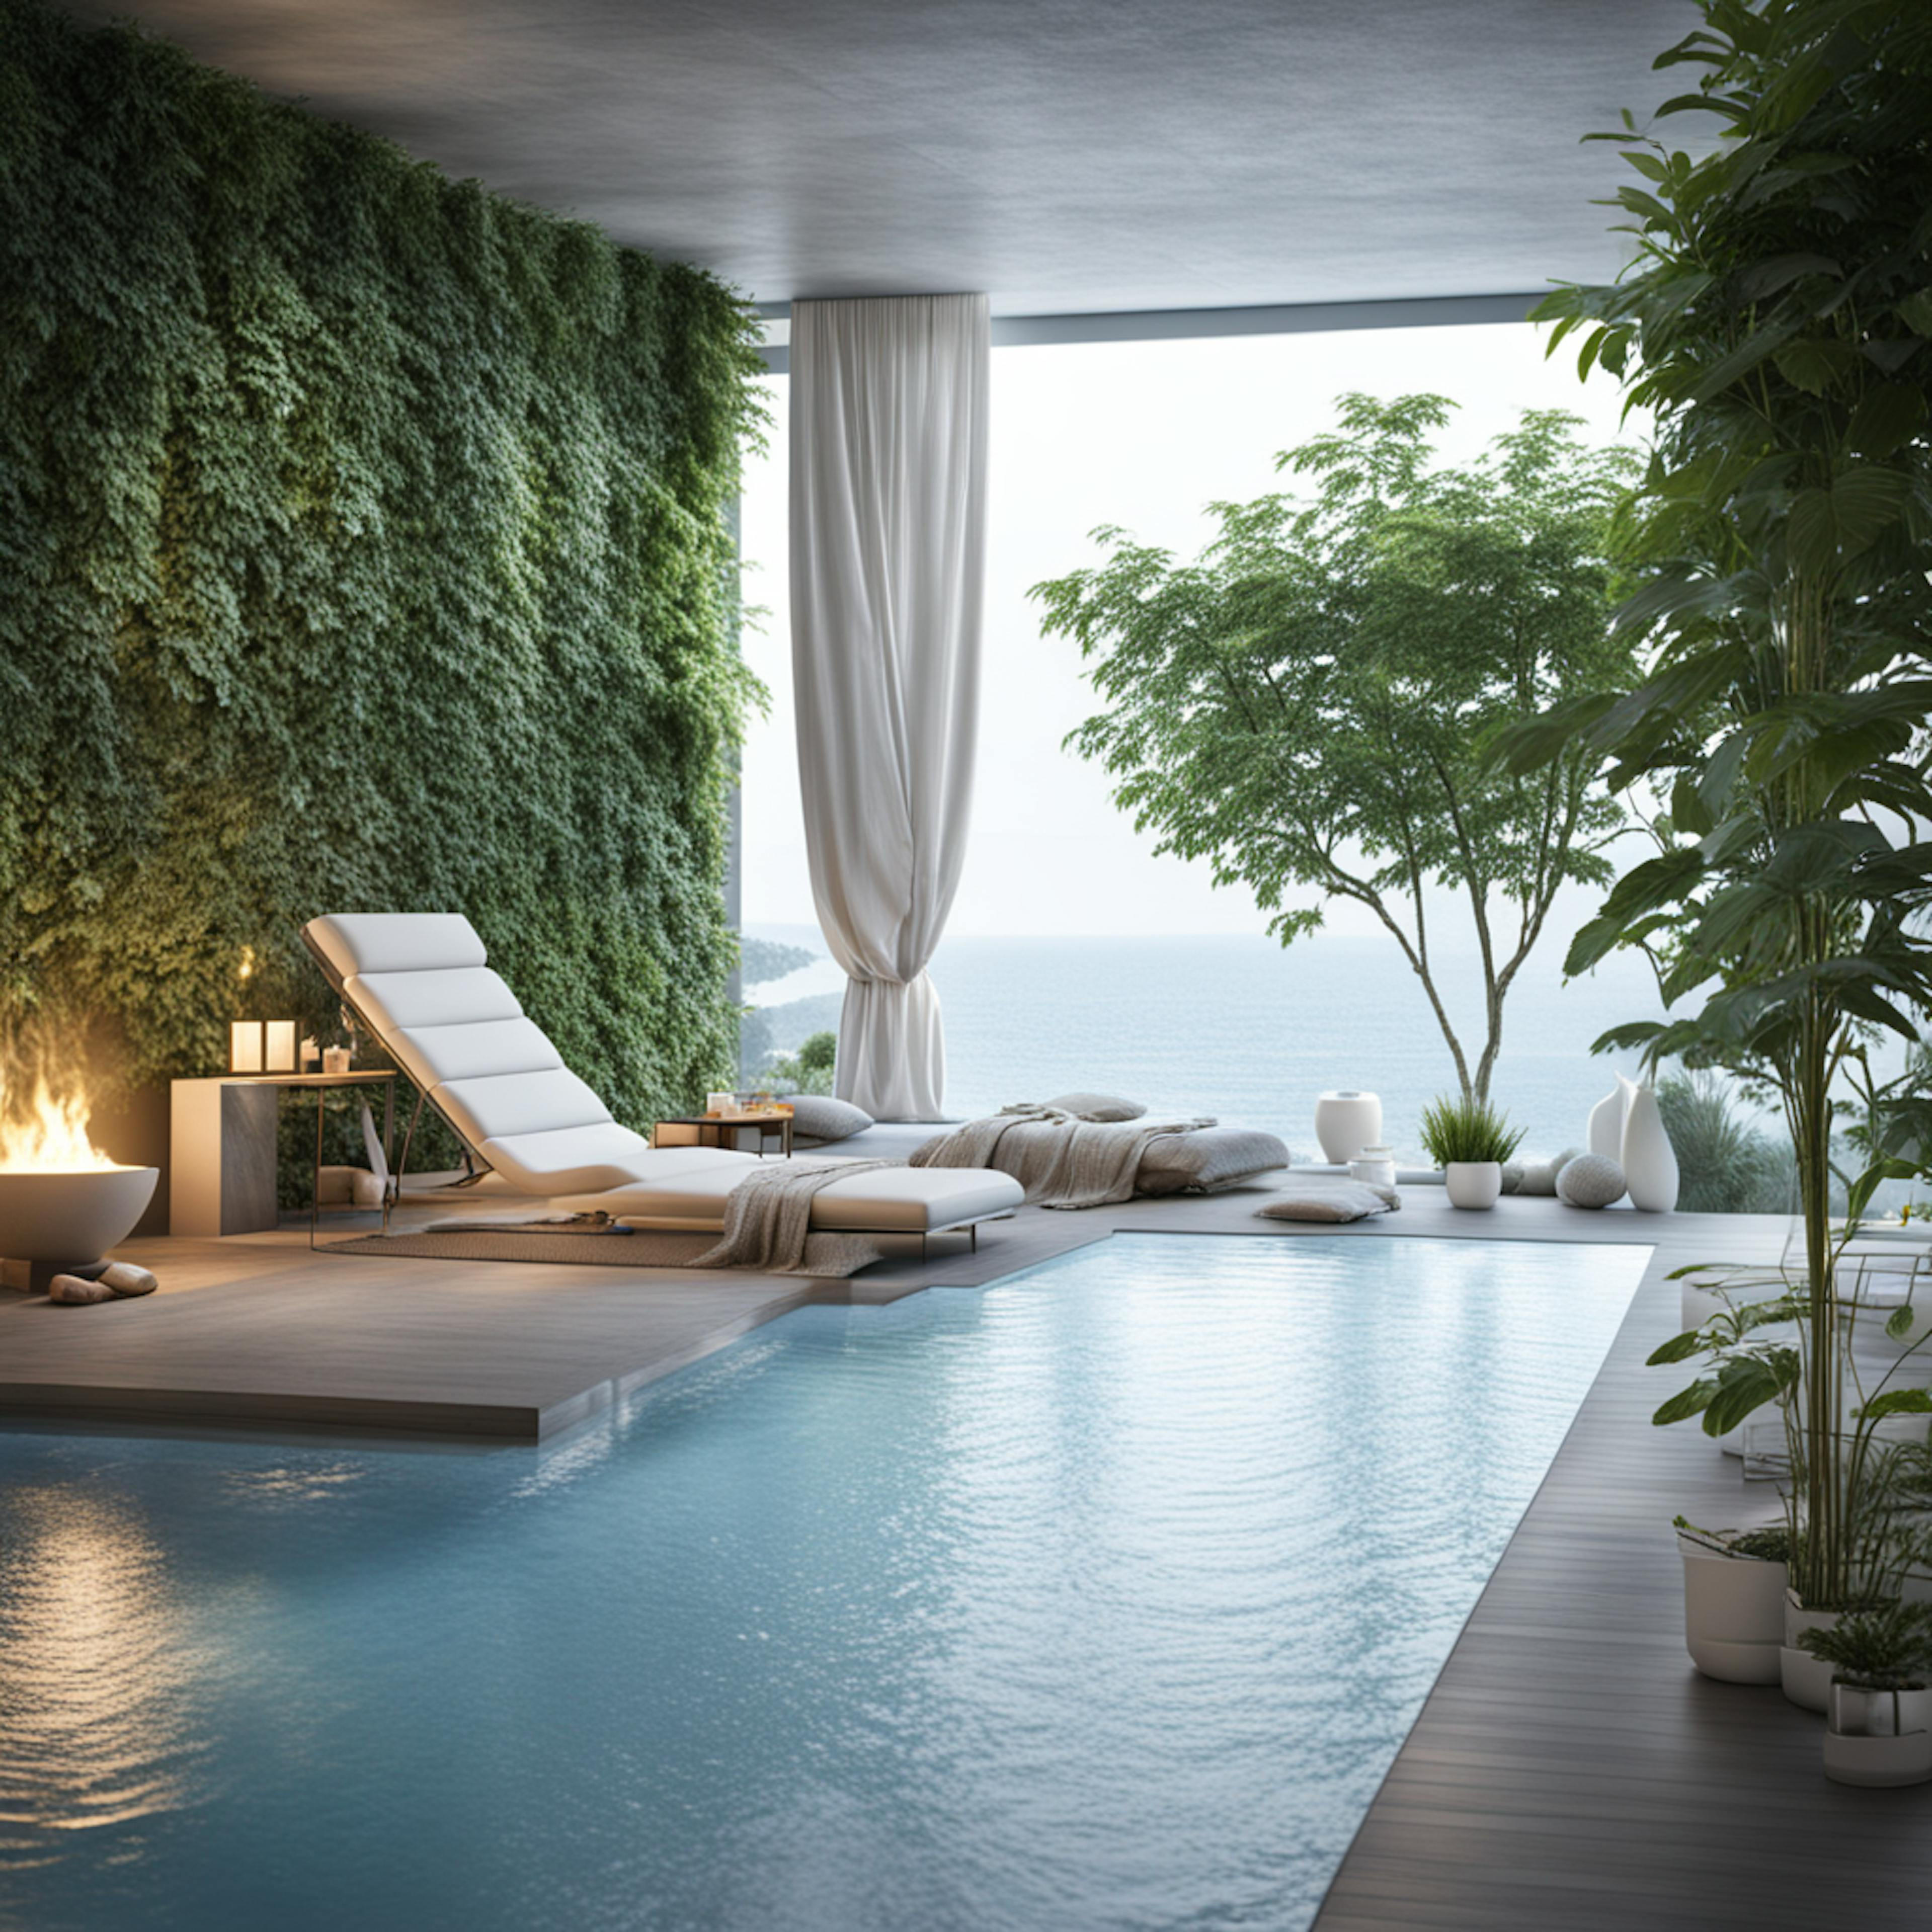 A luxurious wellness retreat featuring a serene indoor pool area with lush greenery, modern lounge chairs, and a panoramic view of the ocean, ideal for health and wellness affiliate marketing.